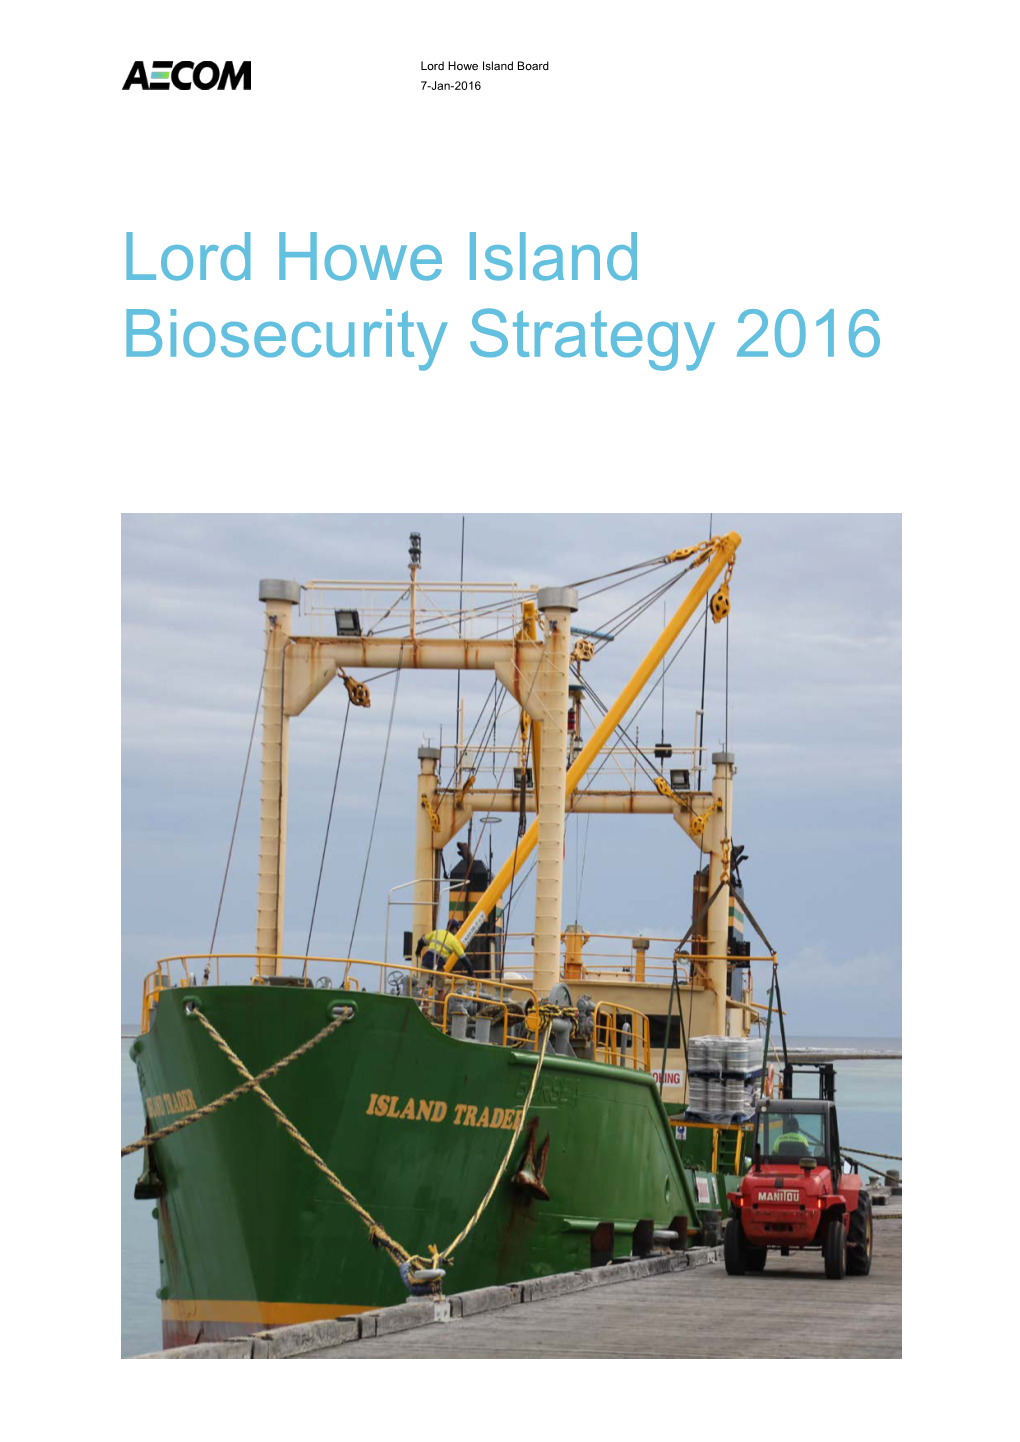 Lord Howe Island Biosecurity Strategy 2016